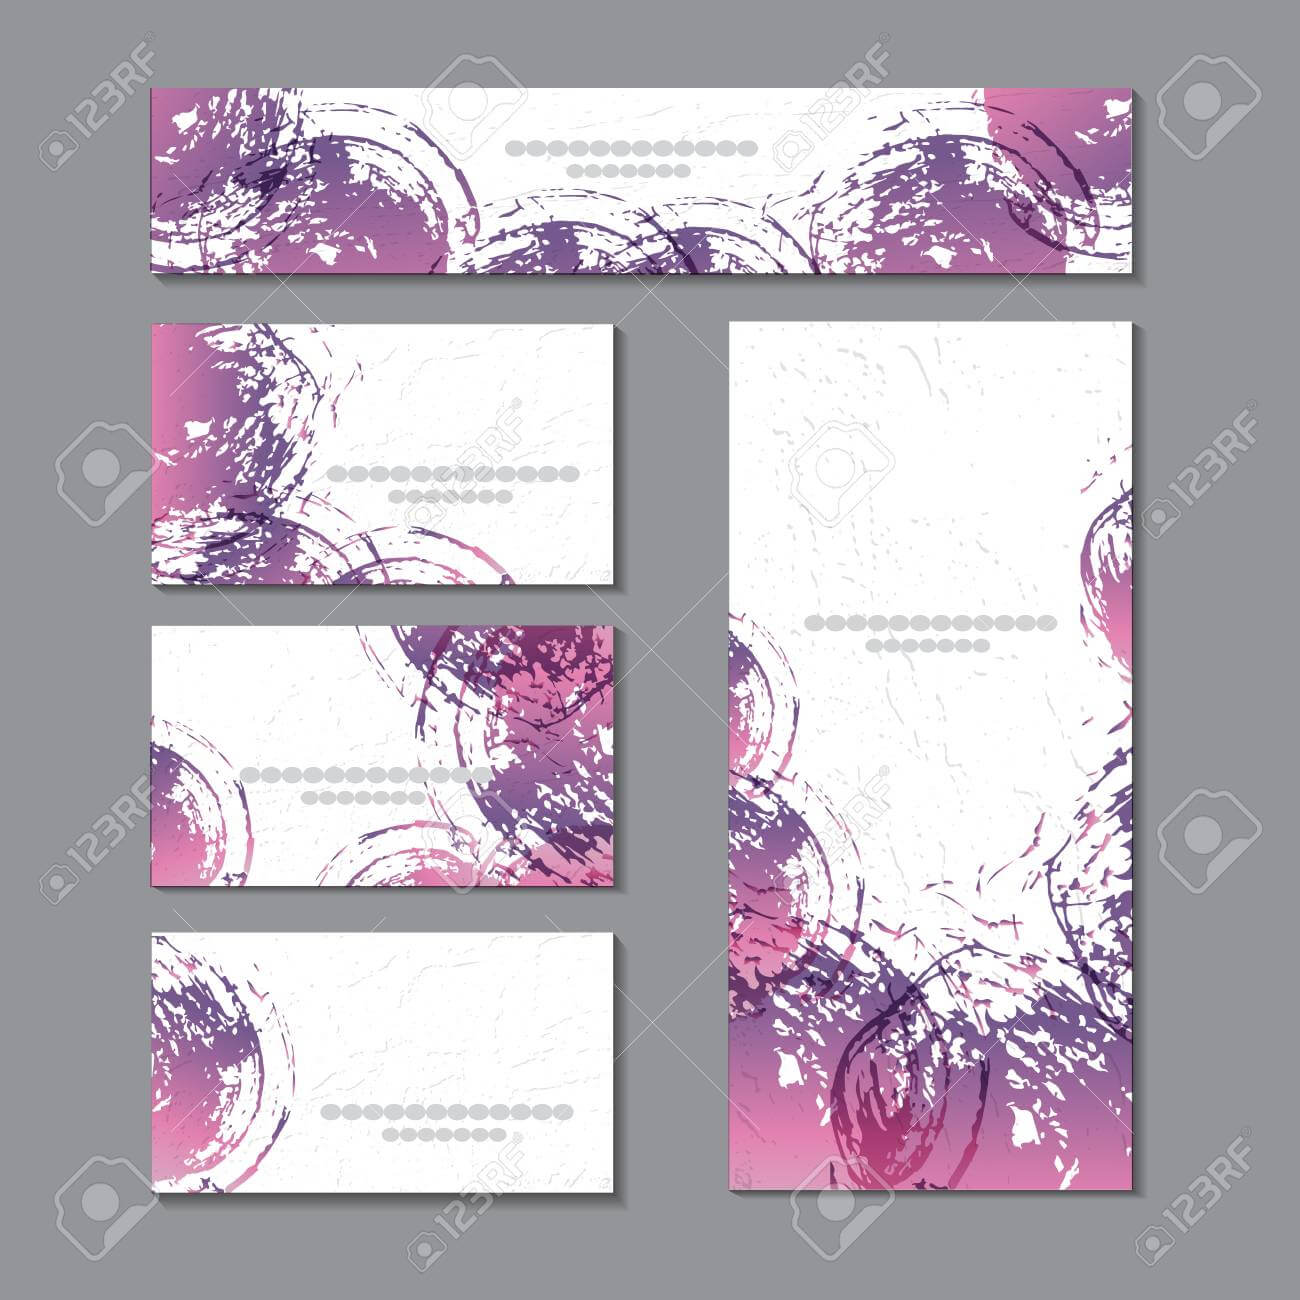 Cute Templates With Abstract Graphics.for Romance And Design,.. With Advertising Cards Templates